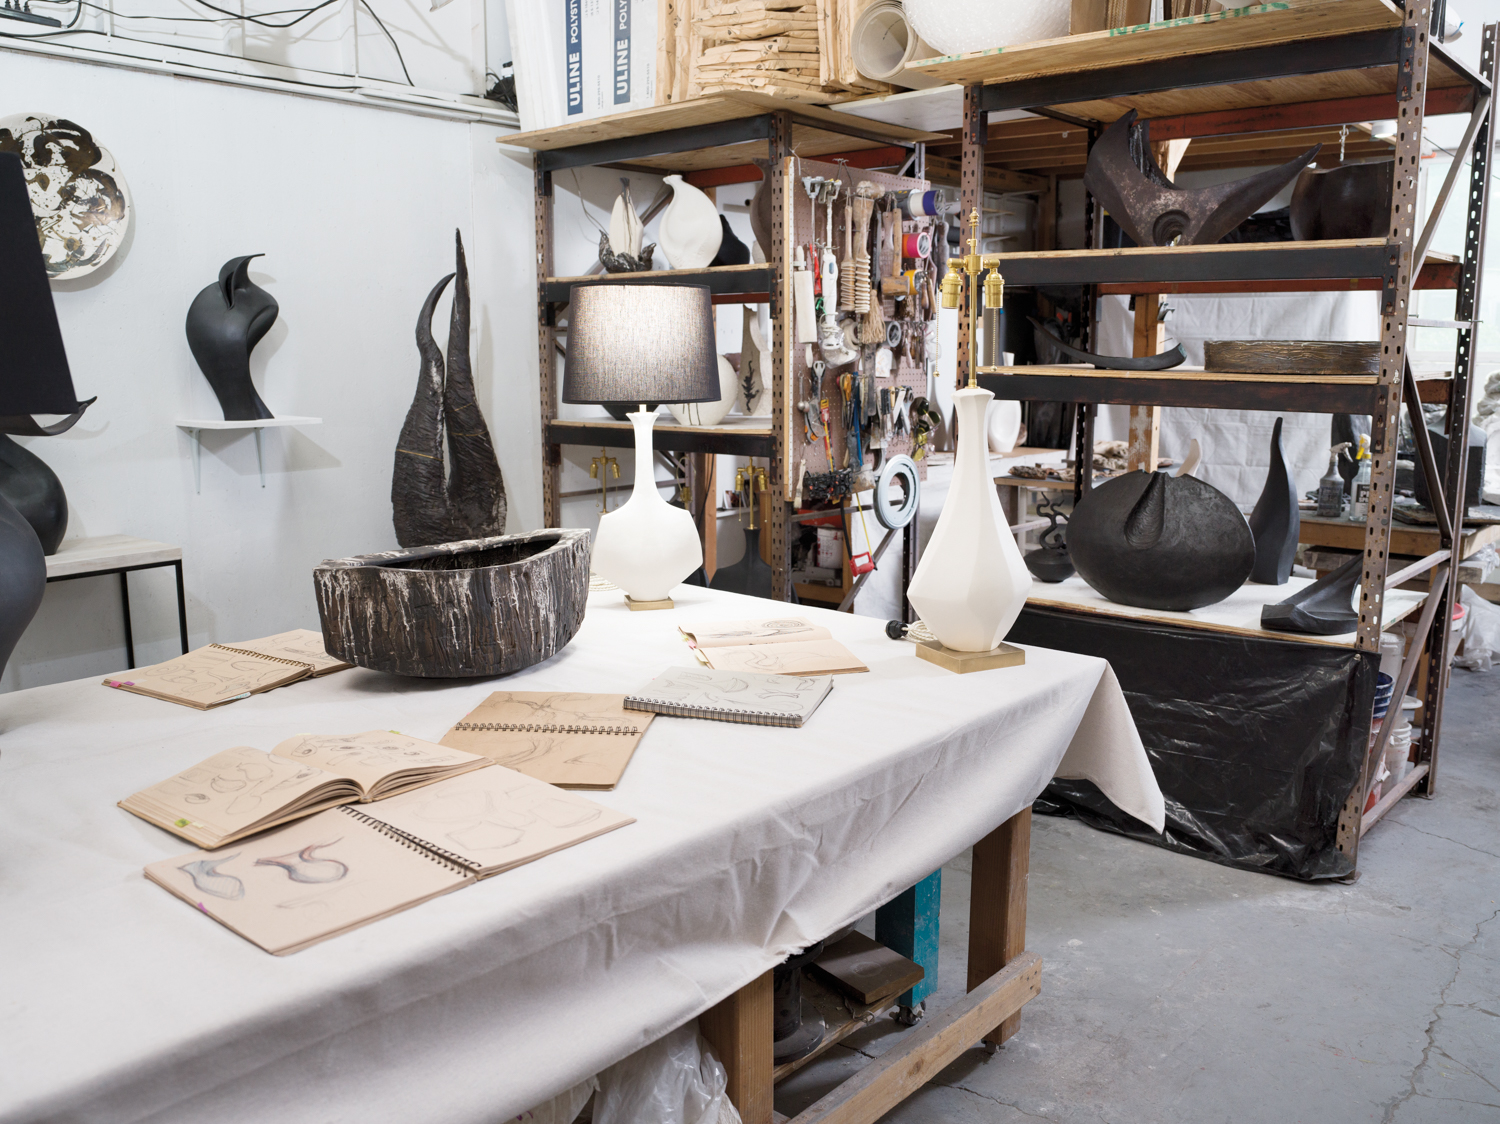 Beverly Morrison's studio, with multiple clay pitches and sketchbooks